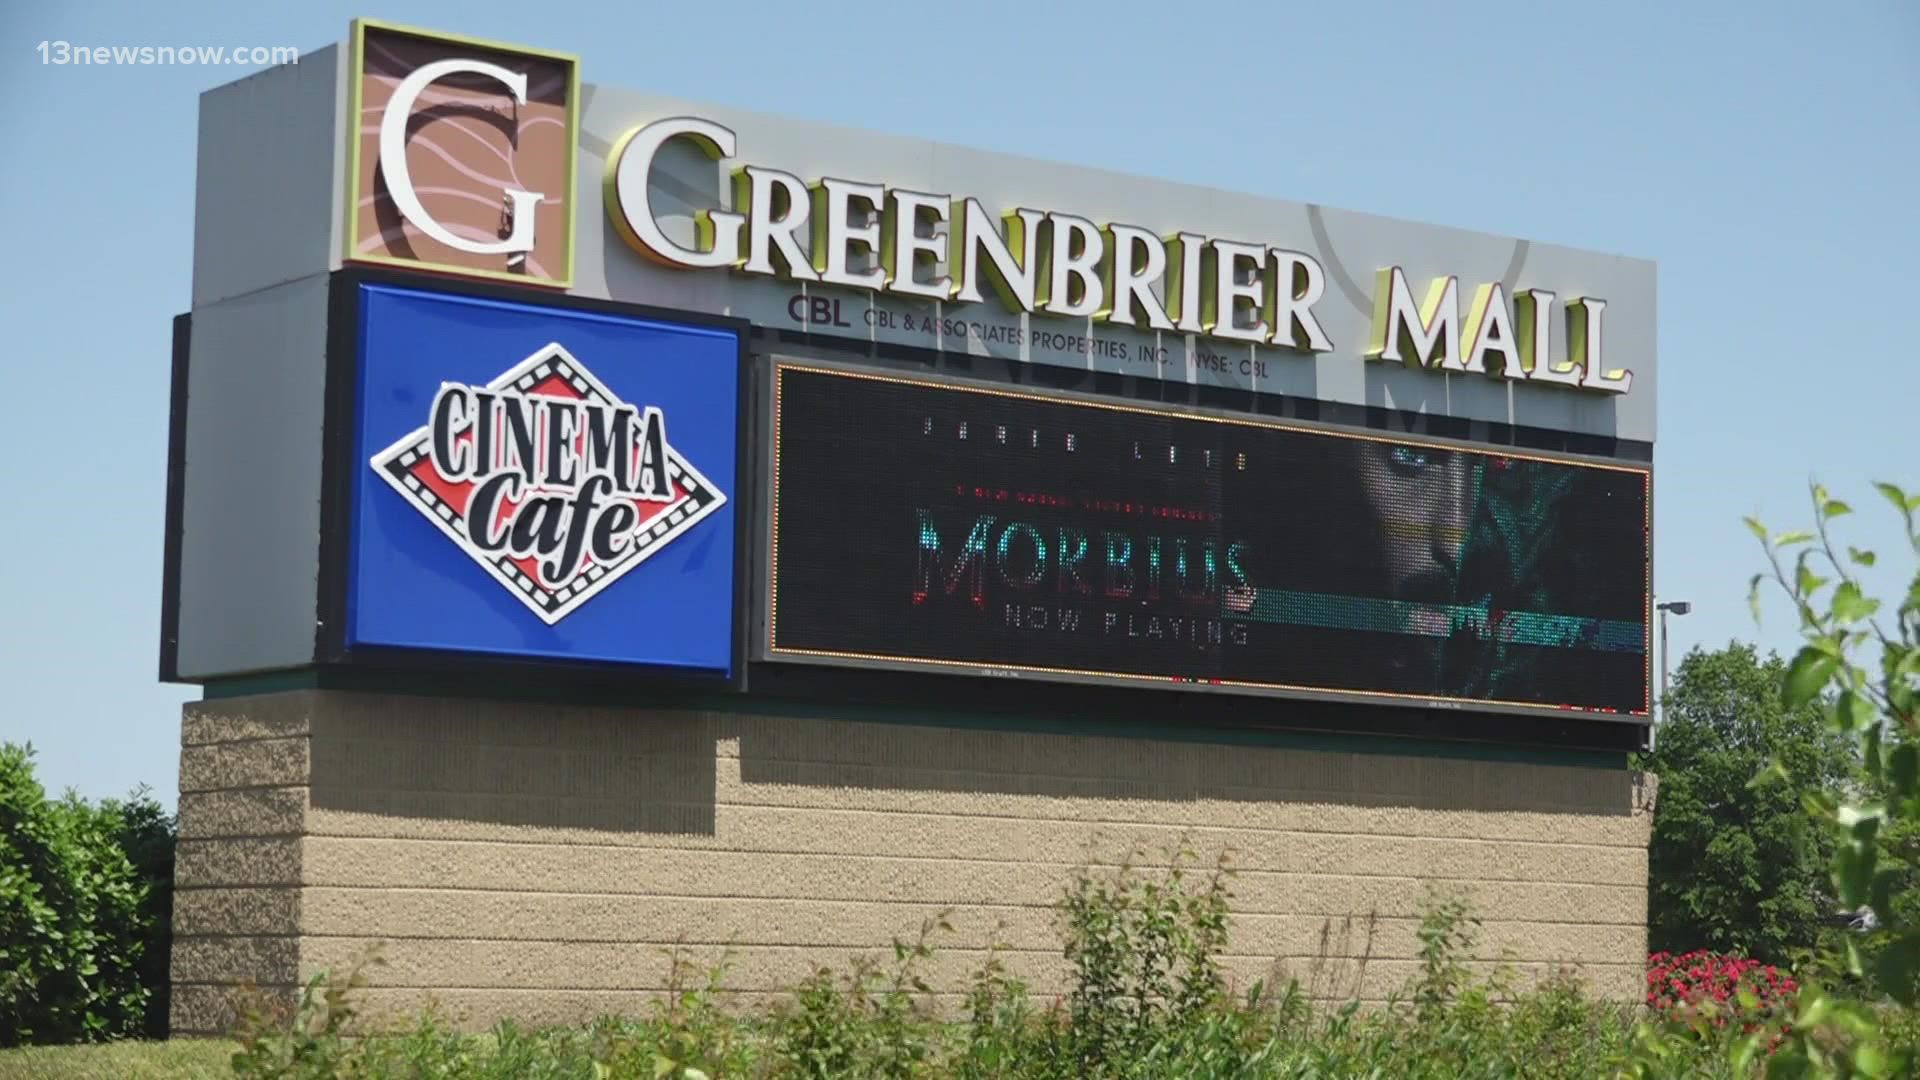 A CBL Properties report shows Greenbrier Mall is worth more than $60 million.